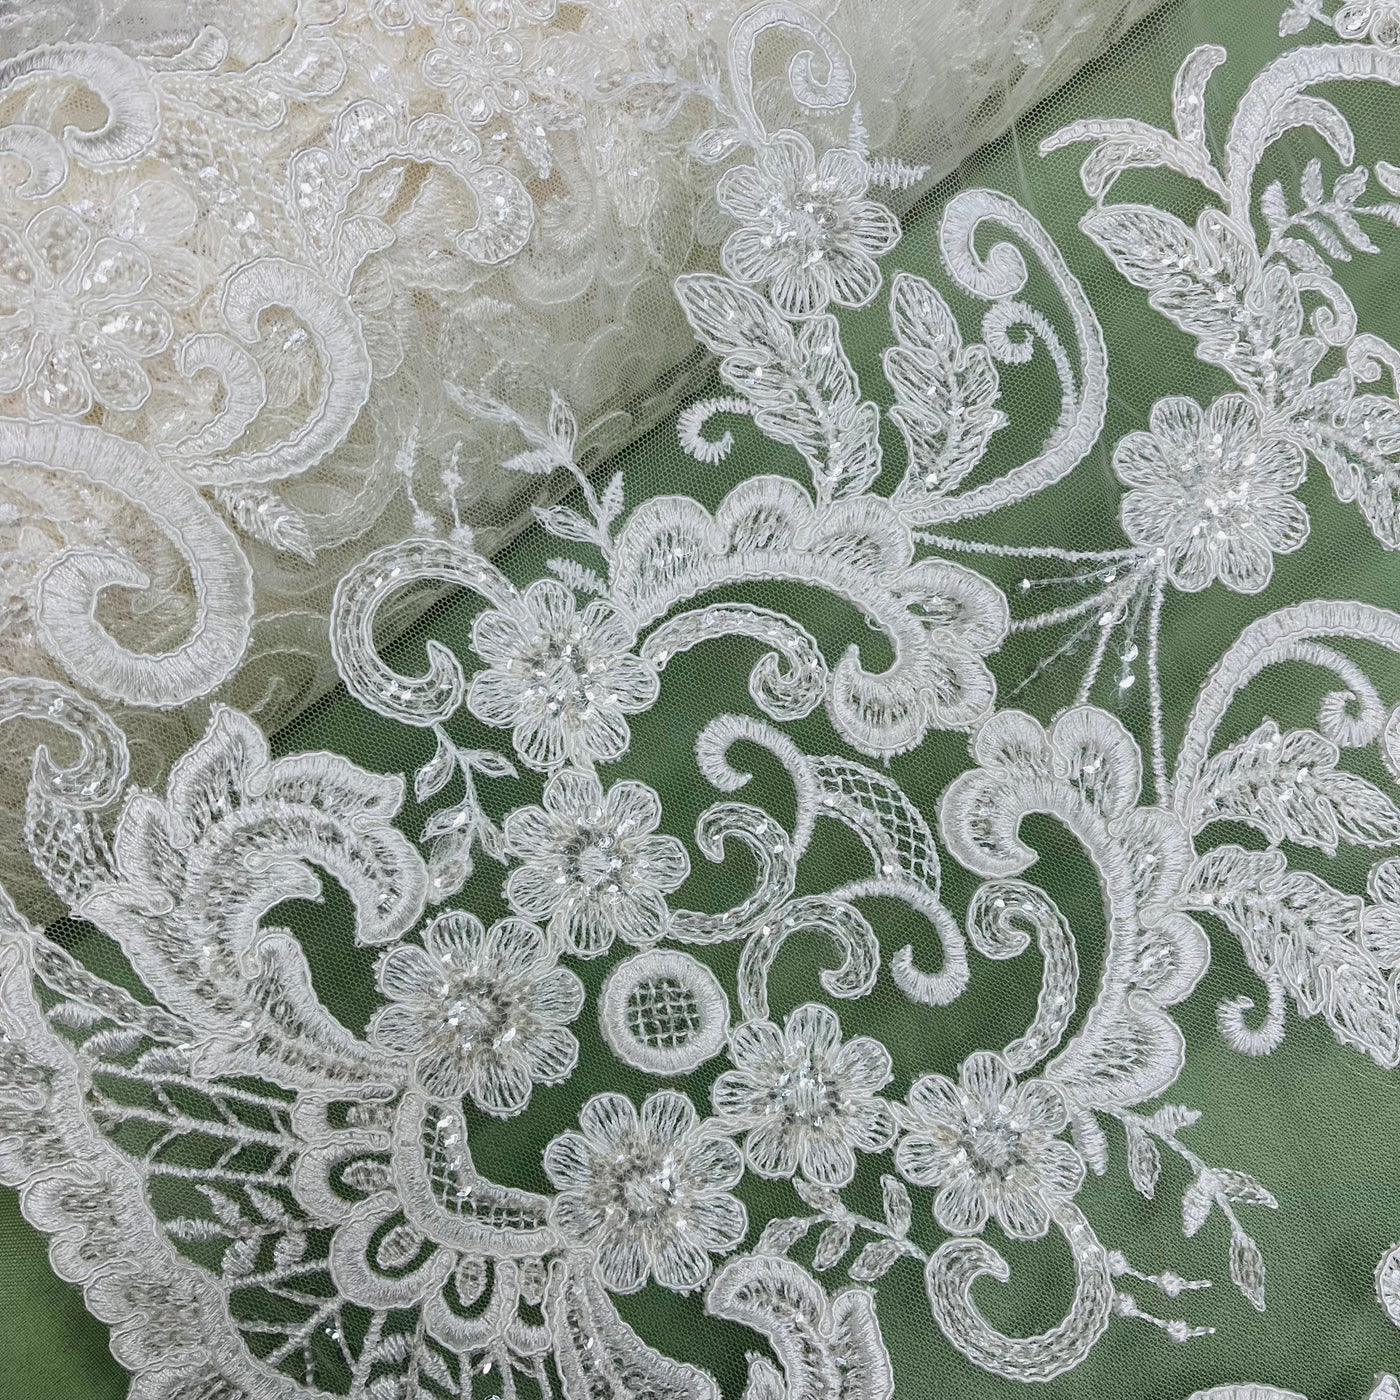 97213W-SB-Beaded & Corded Bridal Fabric Lace Embroidered on 100% Polyester Net Mesh | Lace USA